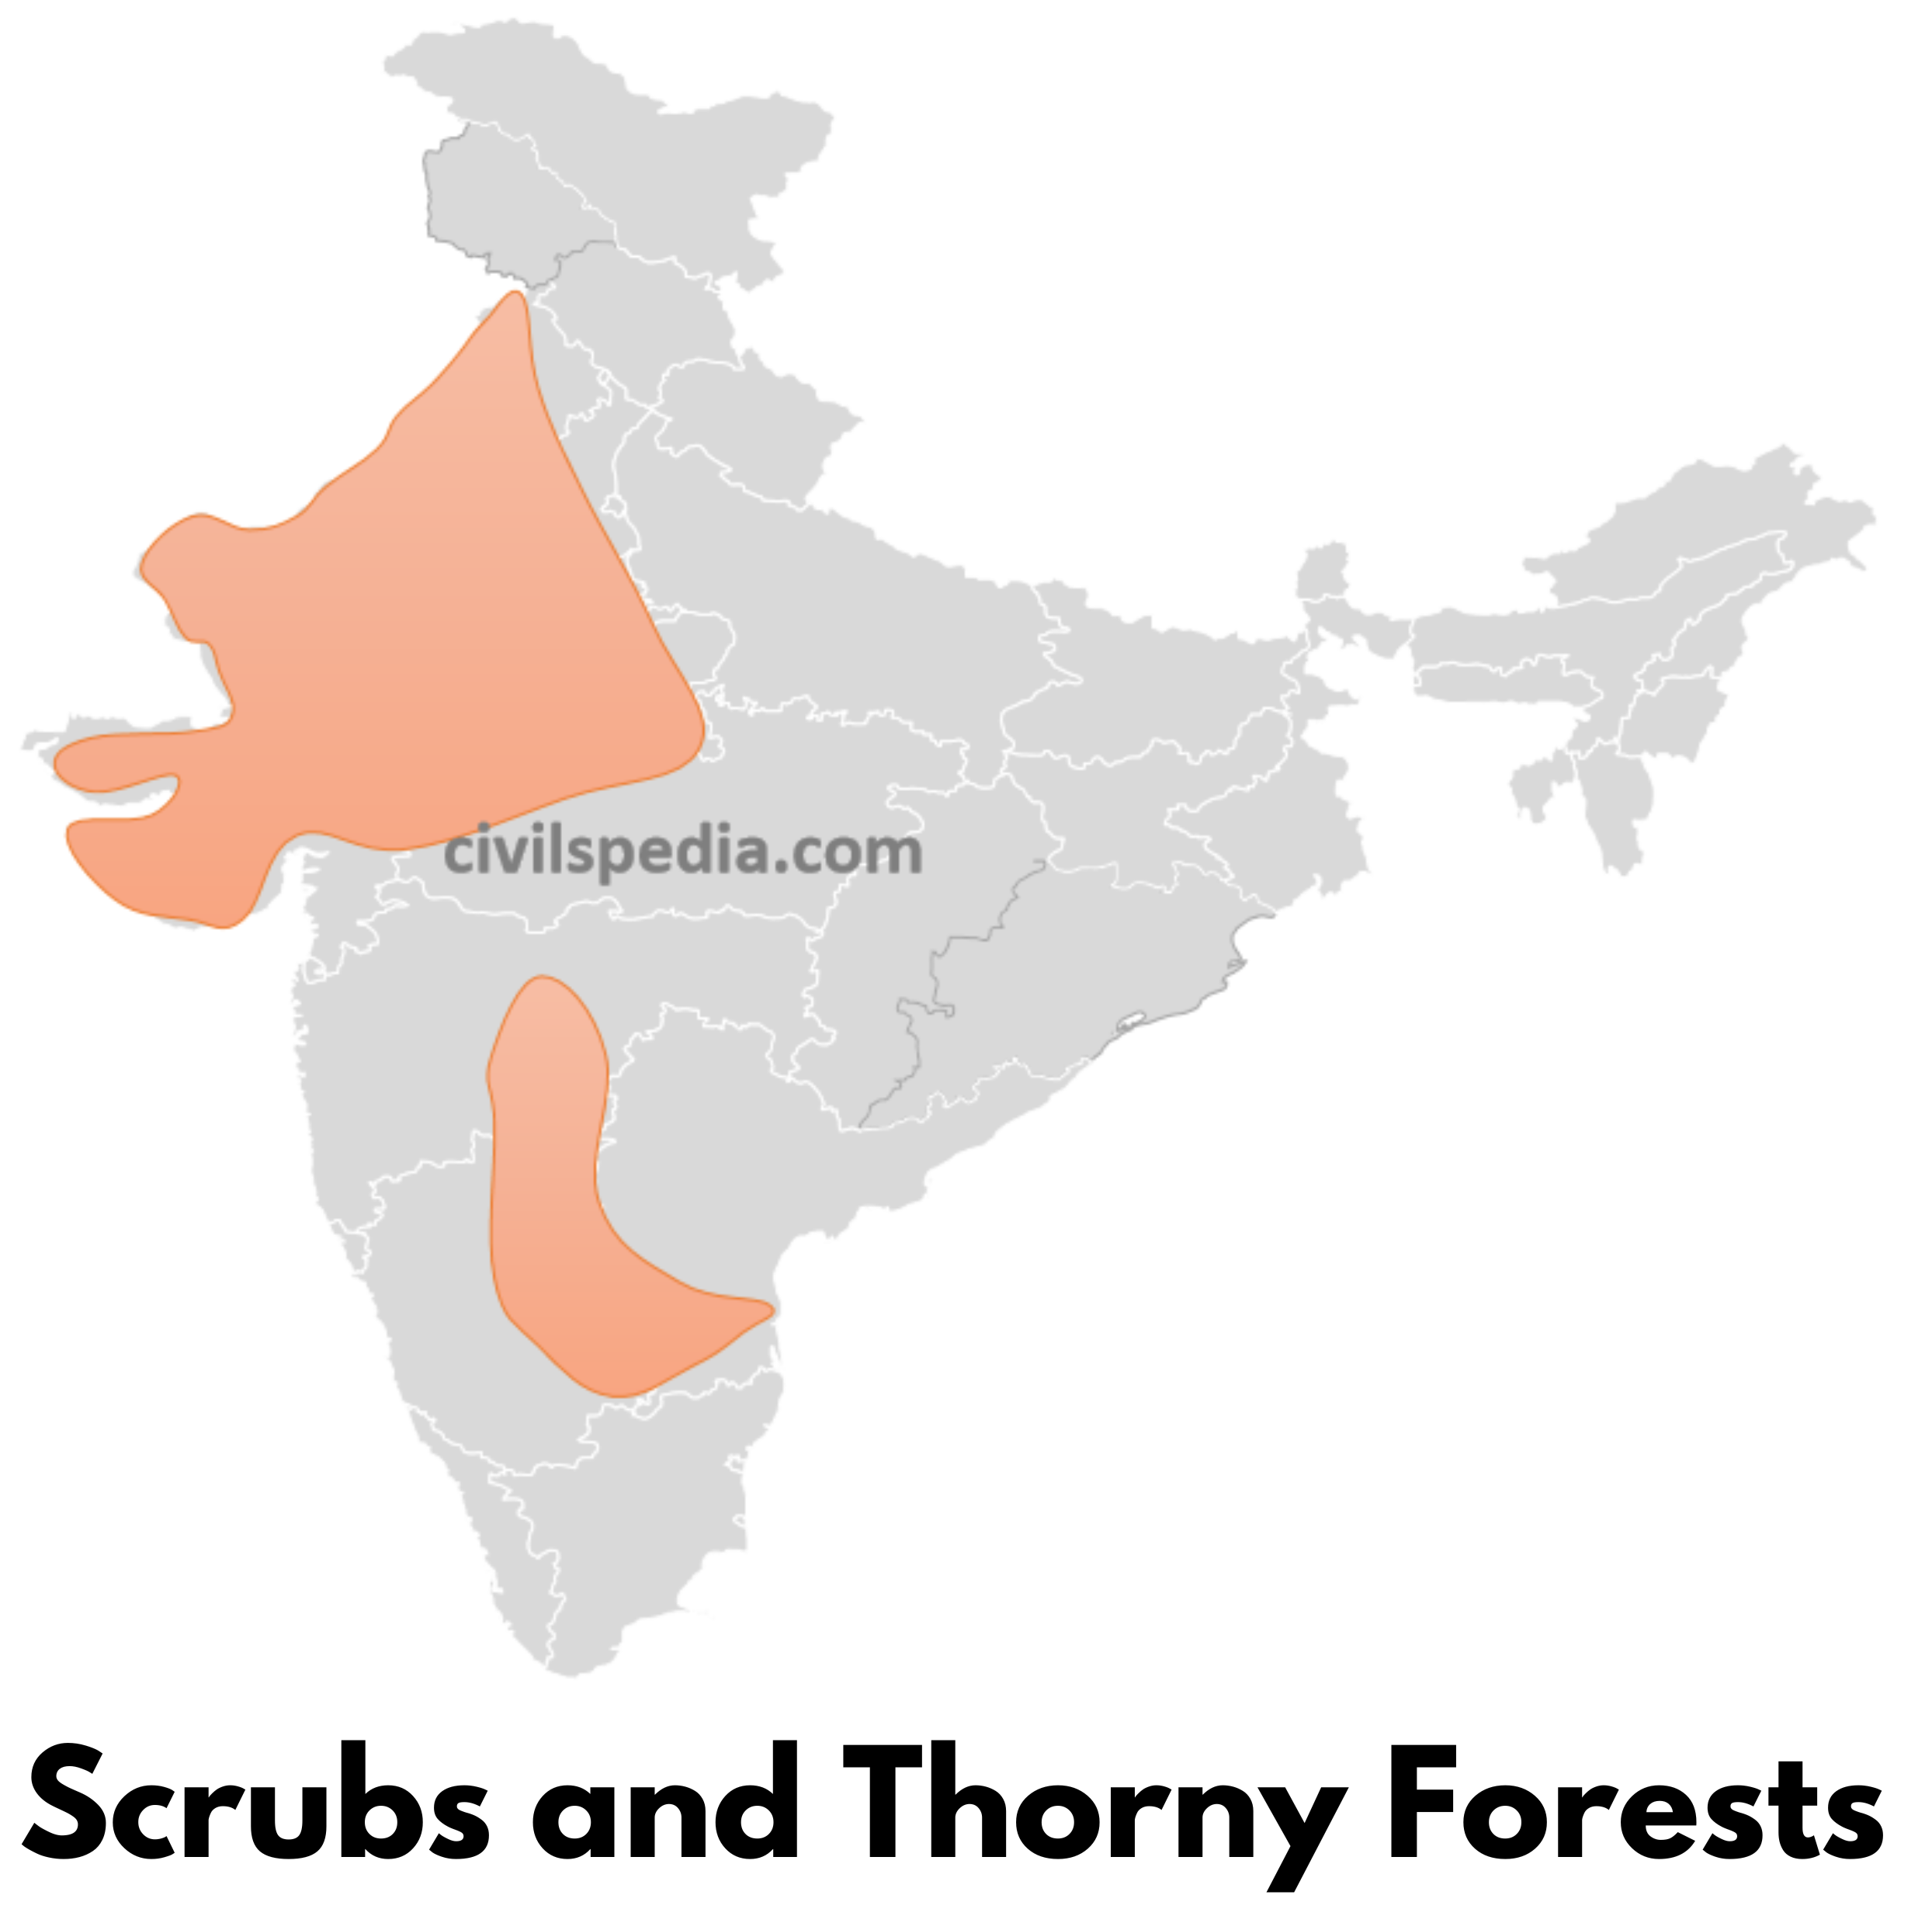 Scrubs and Thorny Forests